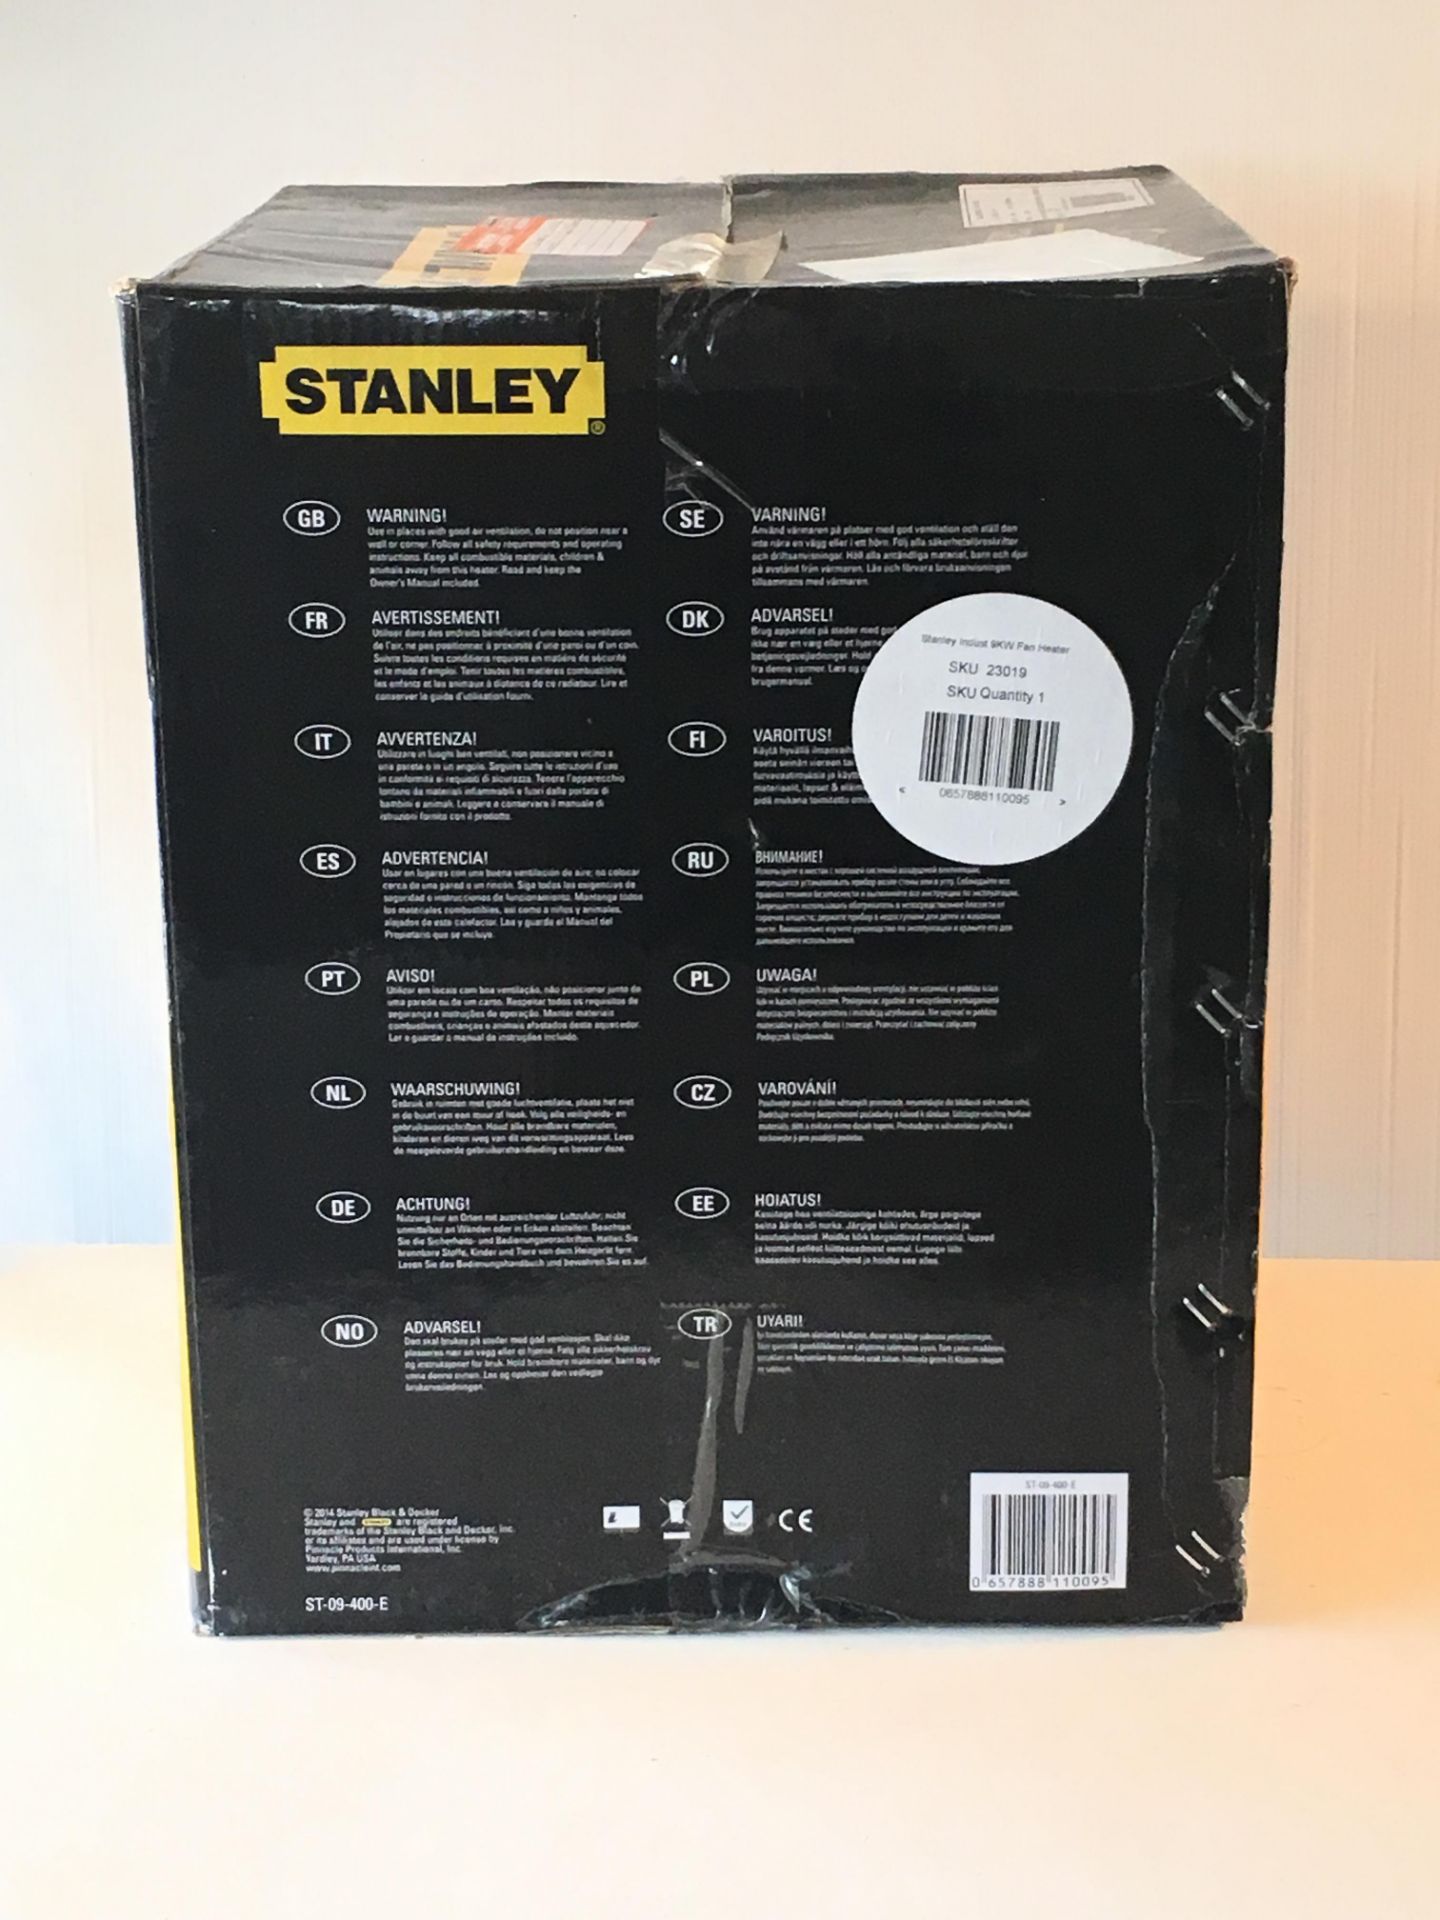 New Stanley ST-09-400-E 55/4500/9000W 3 Phase Electric Fan Heater - Image 6 of 8